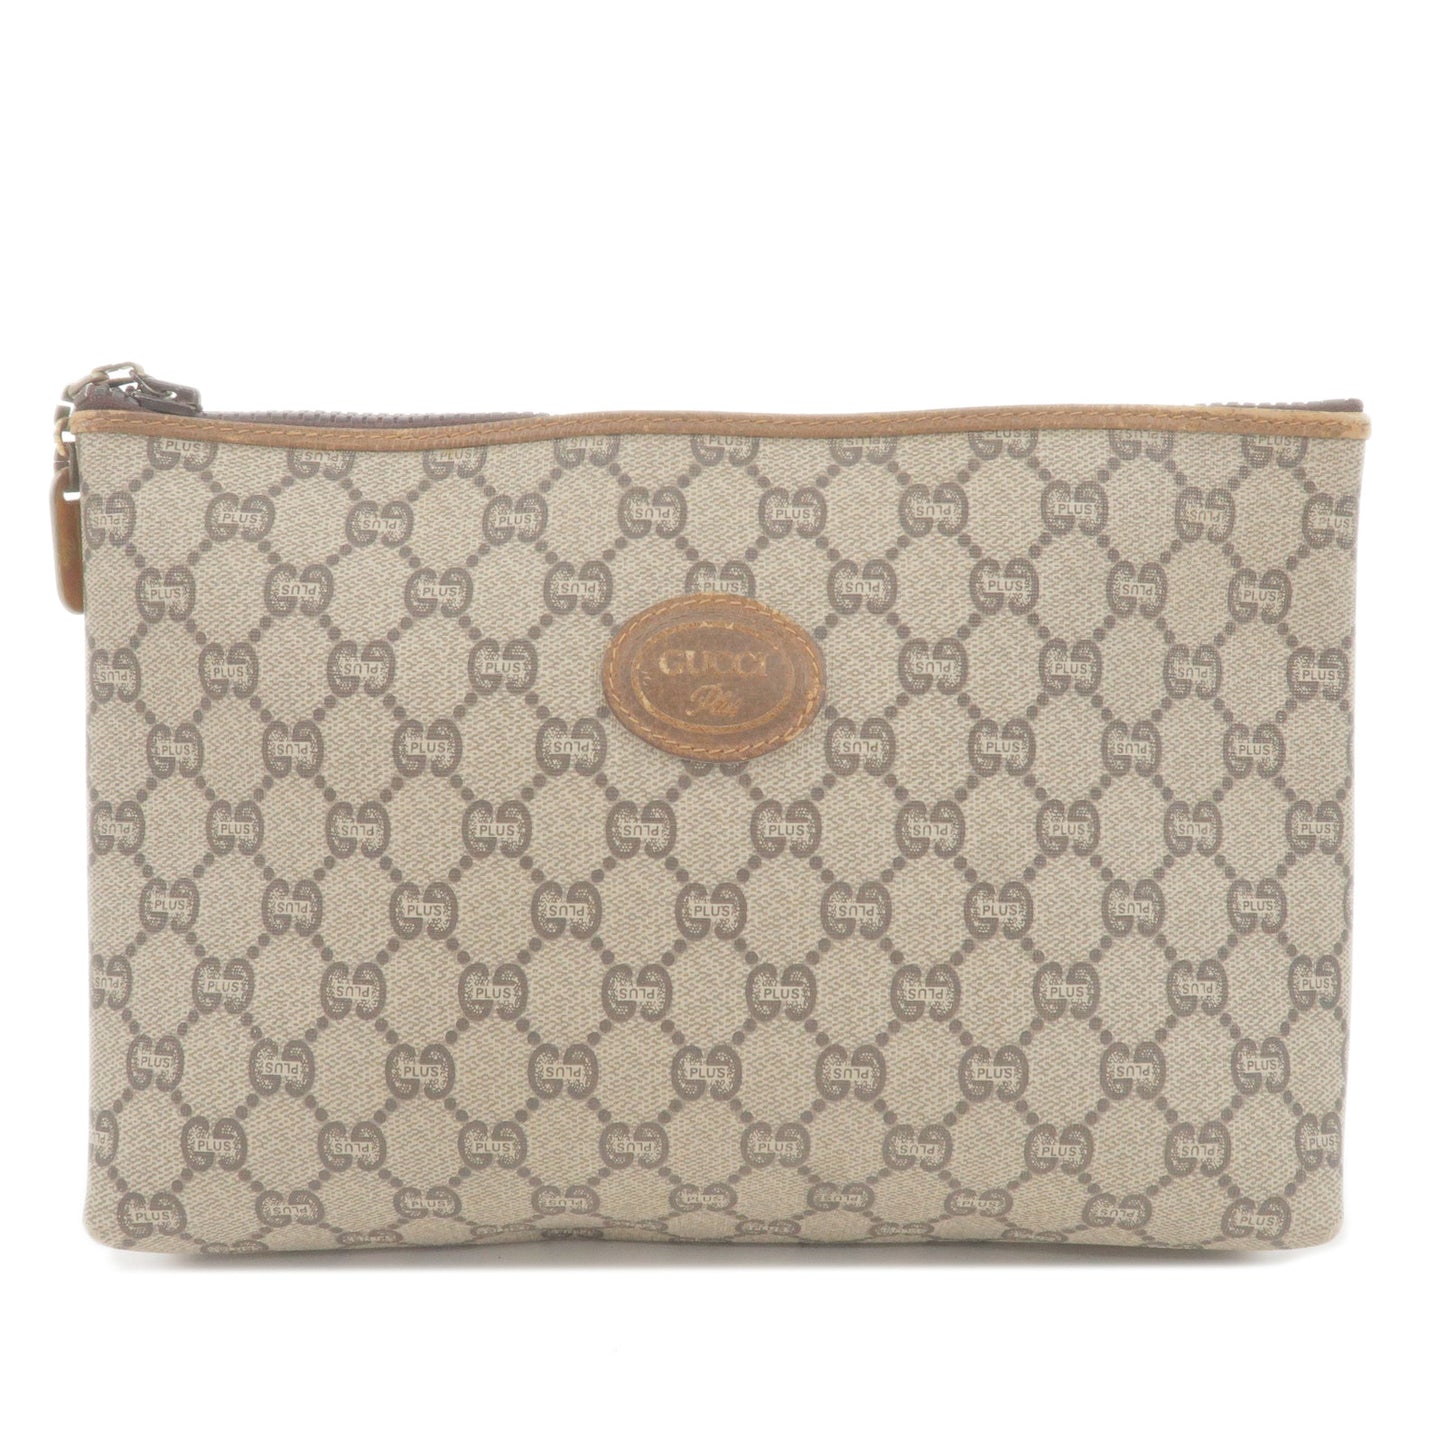 GUCCI-Old-Gucci-GG-Plus-Leather-Clutch-Bag-Pouch-Beige-Brown